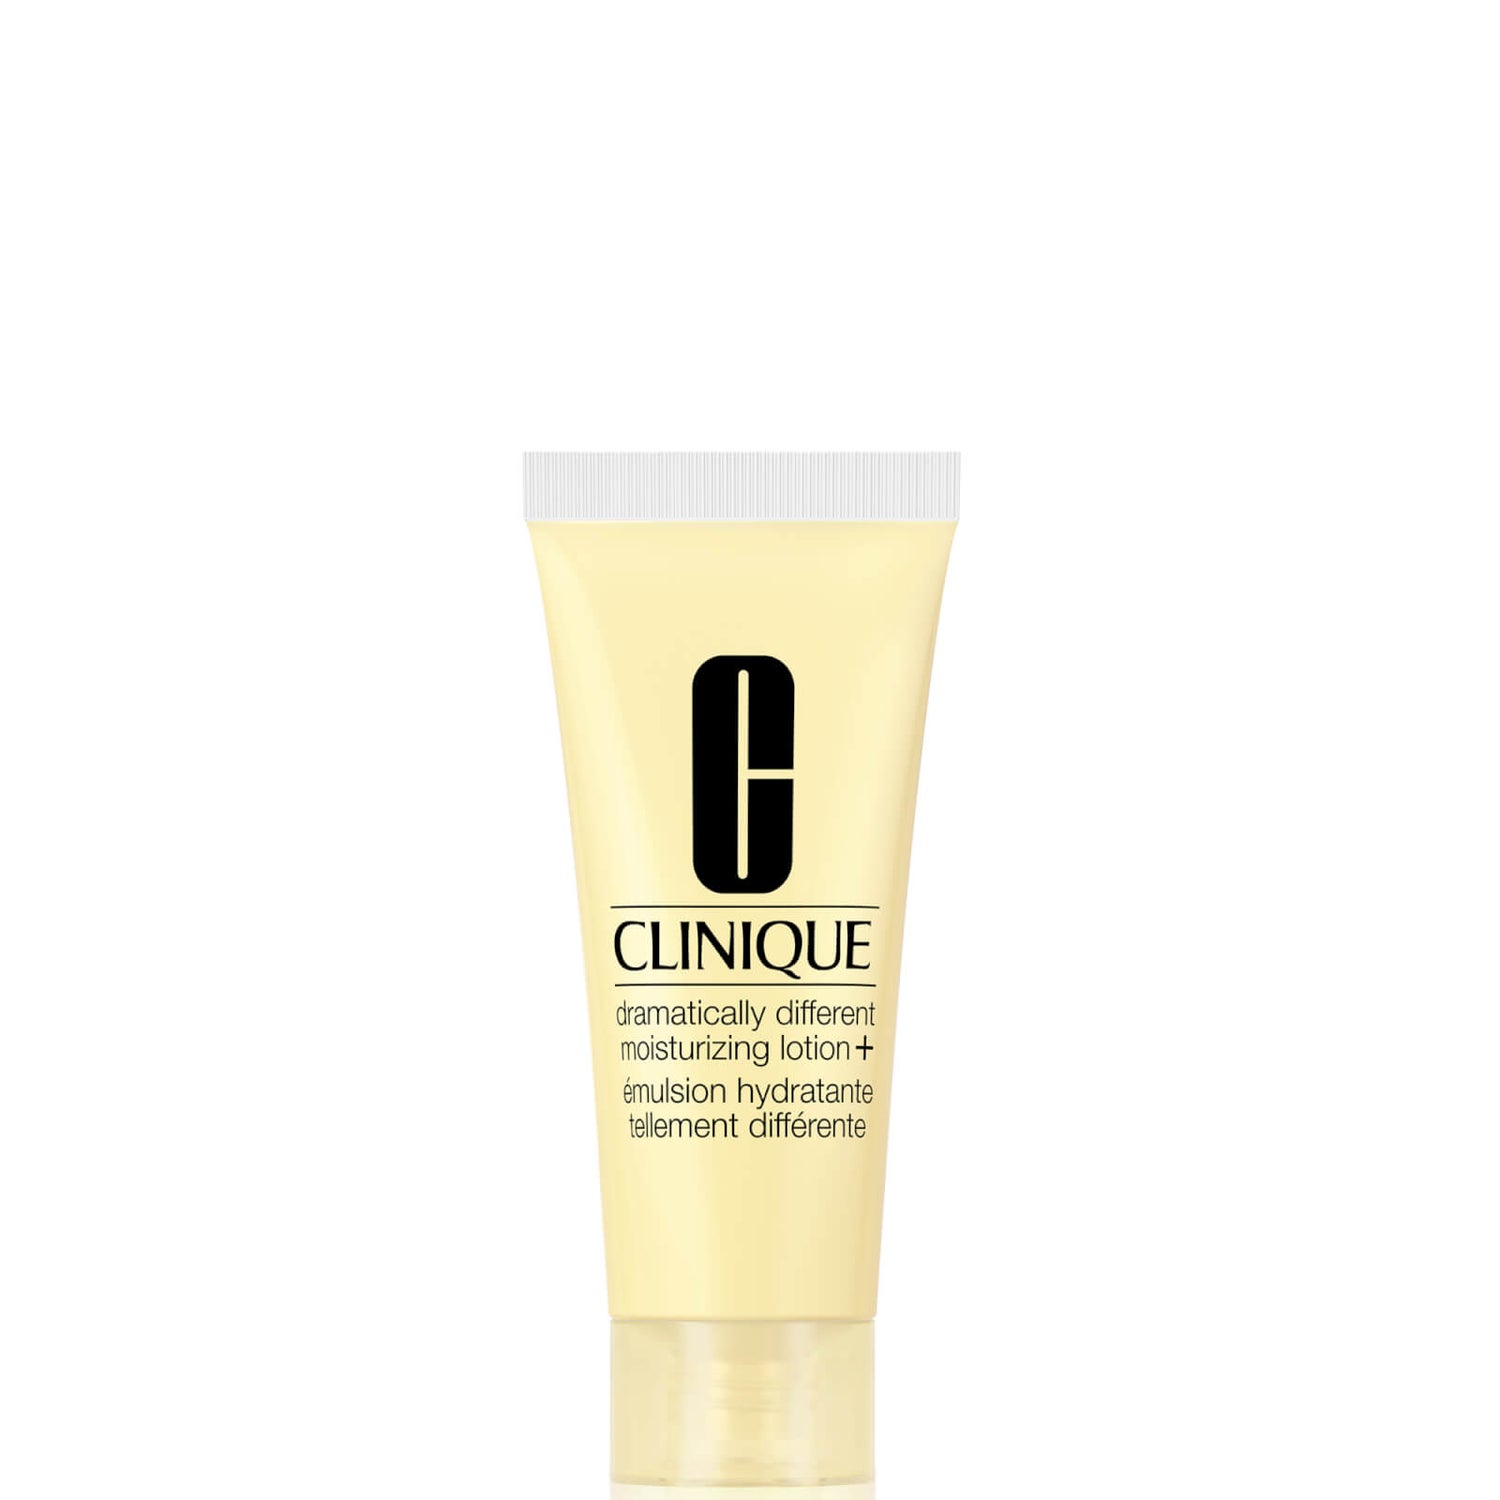 Clinique Dramatically Different Moisturising Lotion + 15ml Sample (Free Gift)